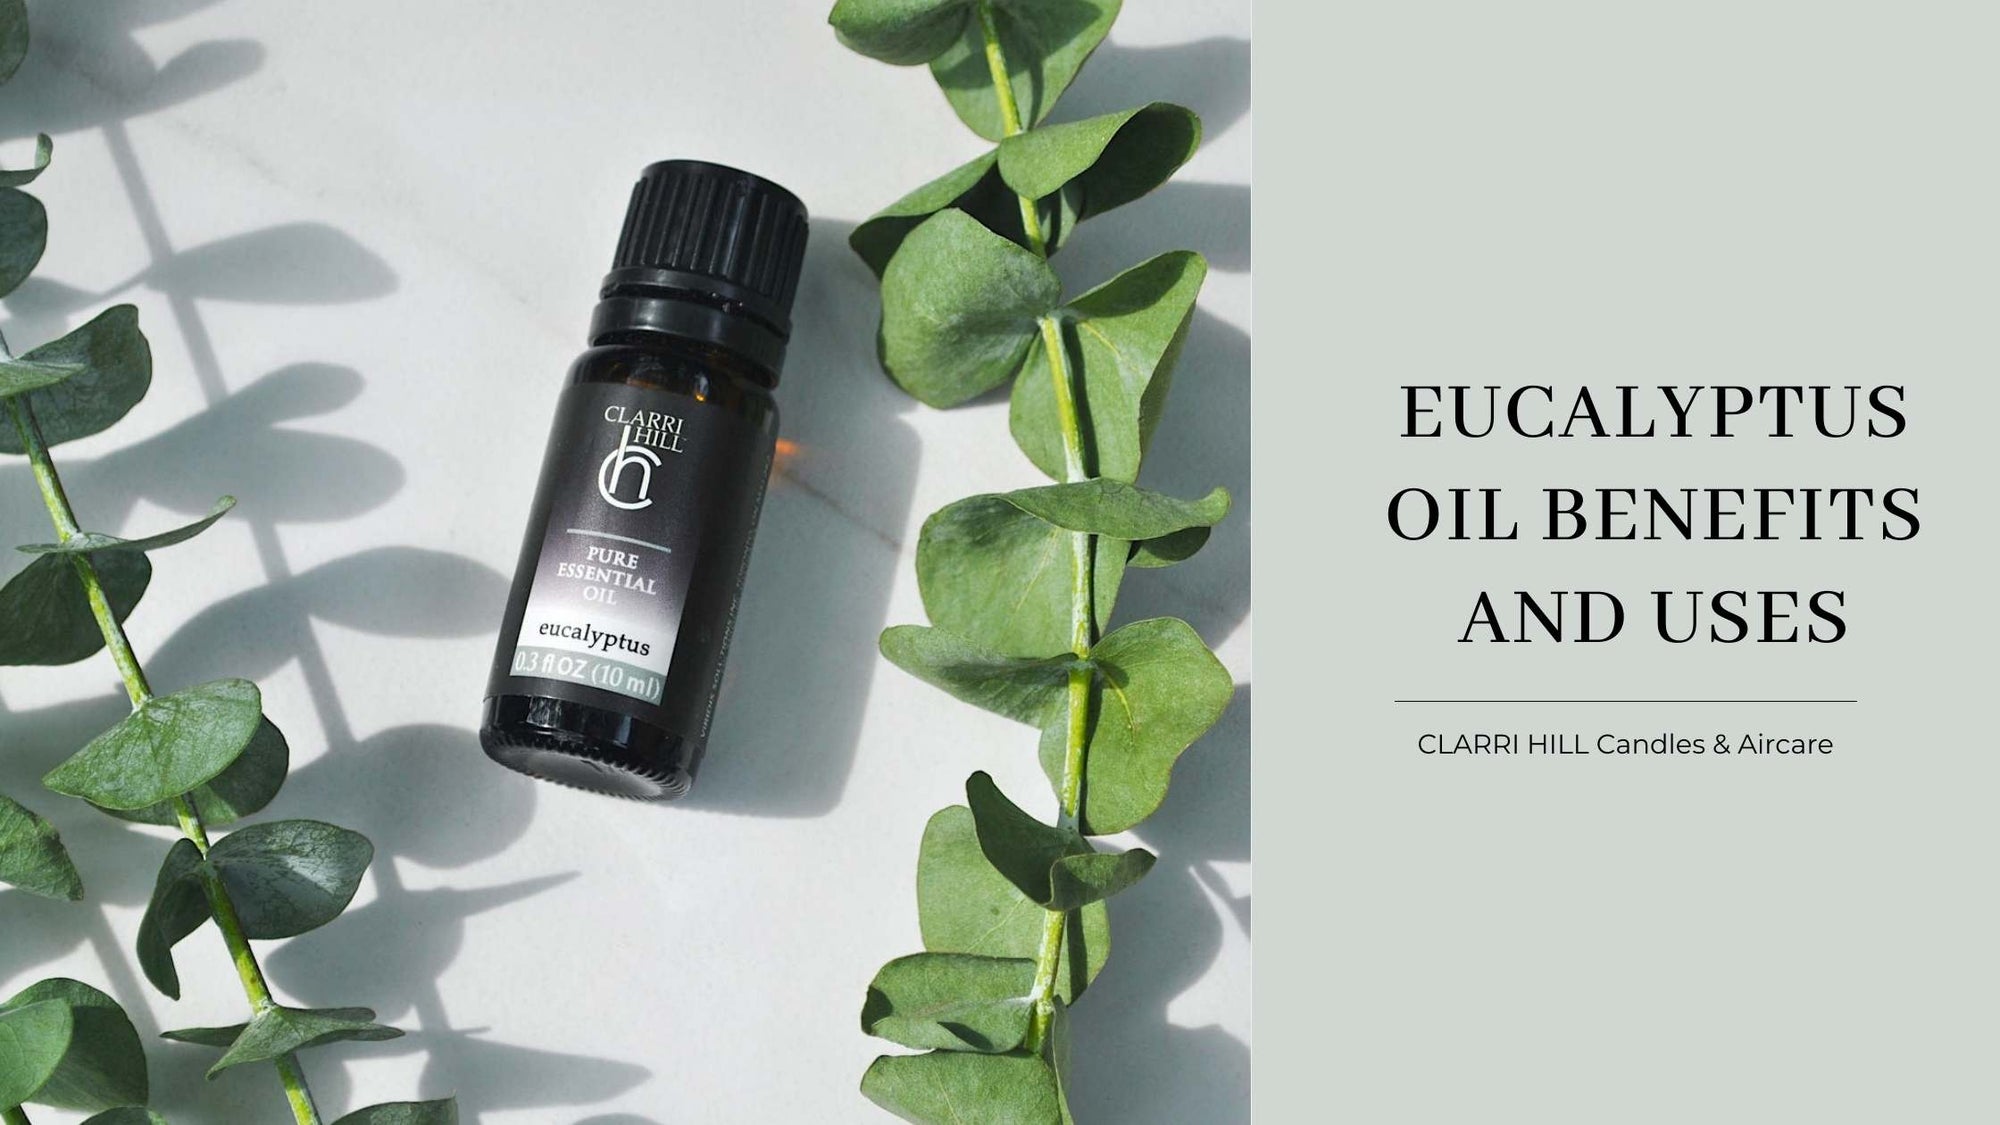 Eucalyptus Oil Benefits and Uses | CLARRI HILL